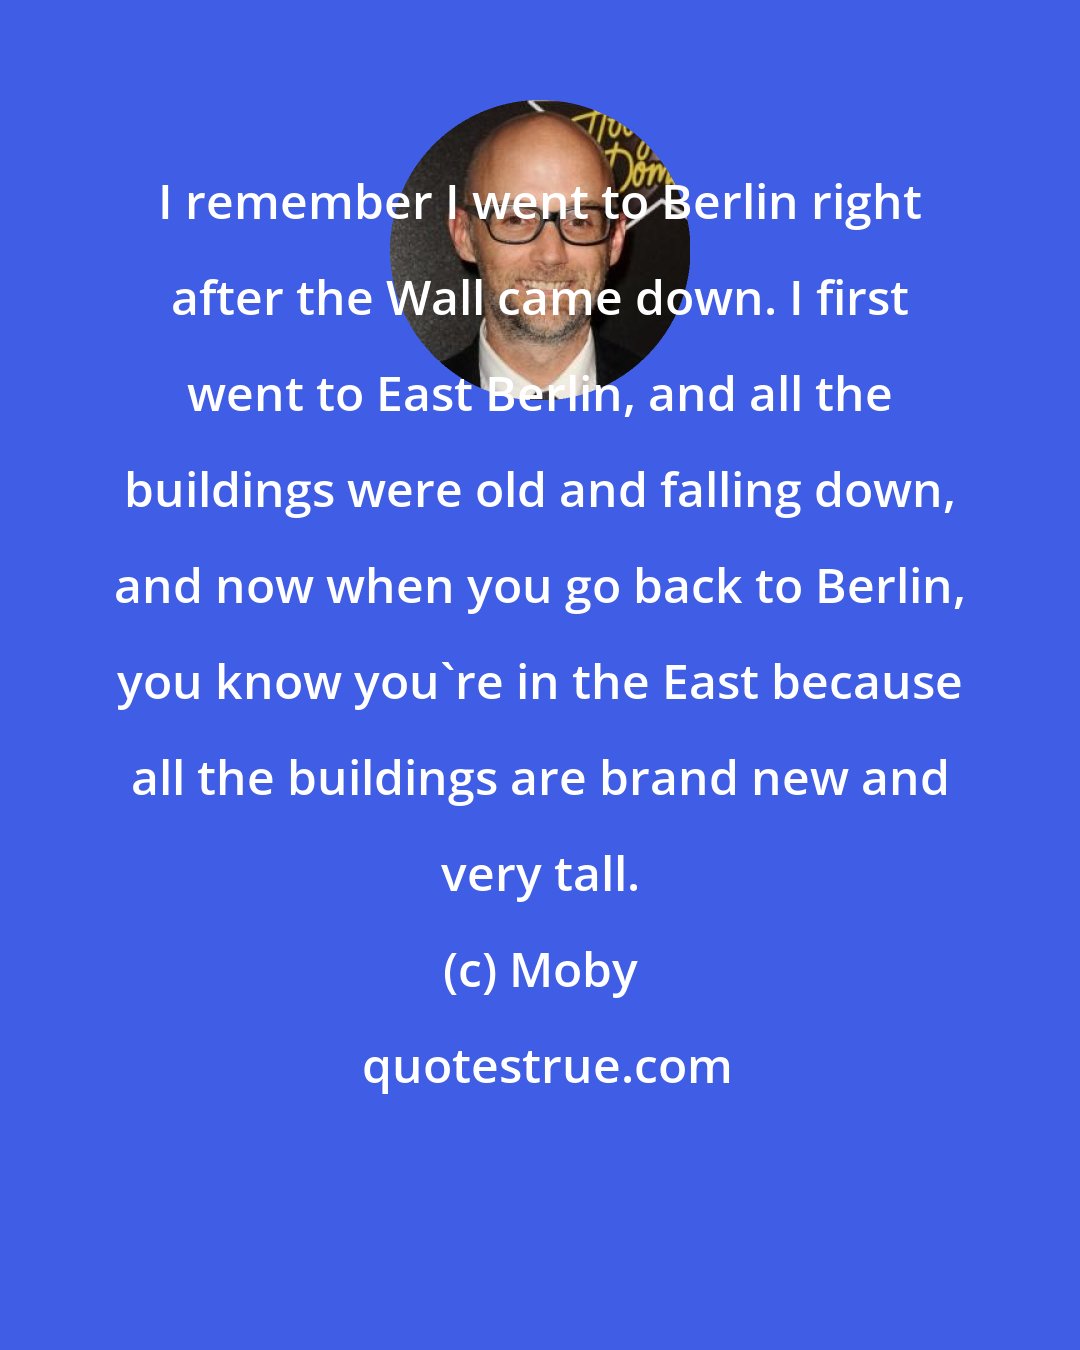 Moby: I remember I went to Berlin right after the Wall came down. I first went to East Berlin, and all the buildings were old and falling down, and now when you go back to Berlin, you know you're in the East because all the buildings are brand new and very tall.